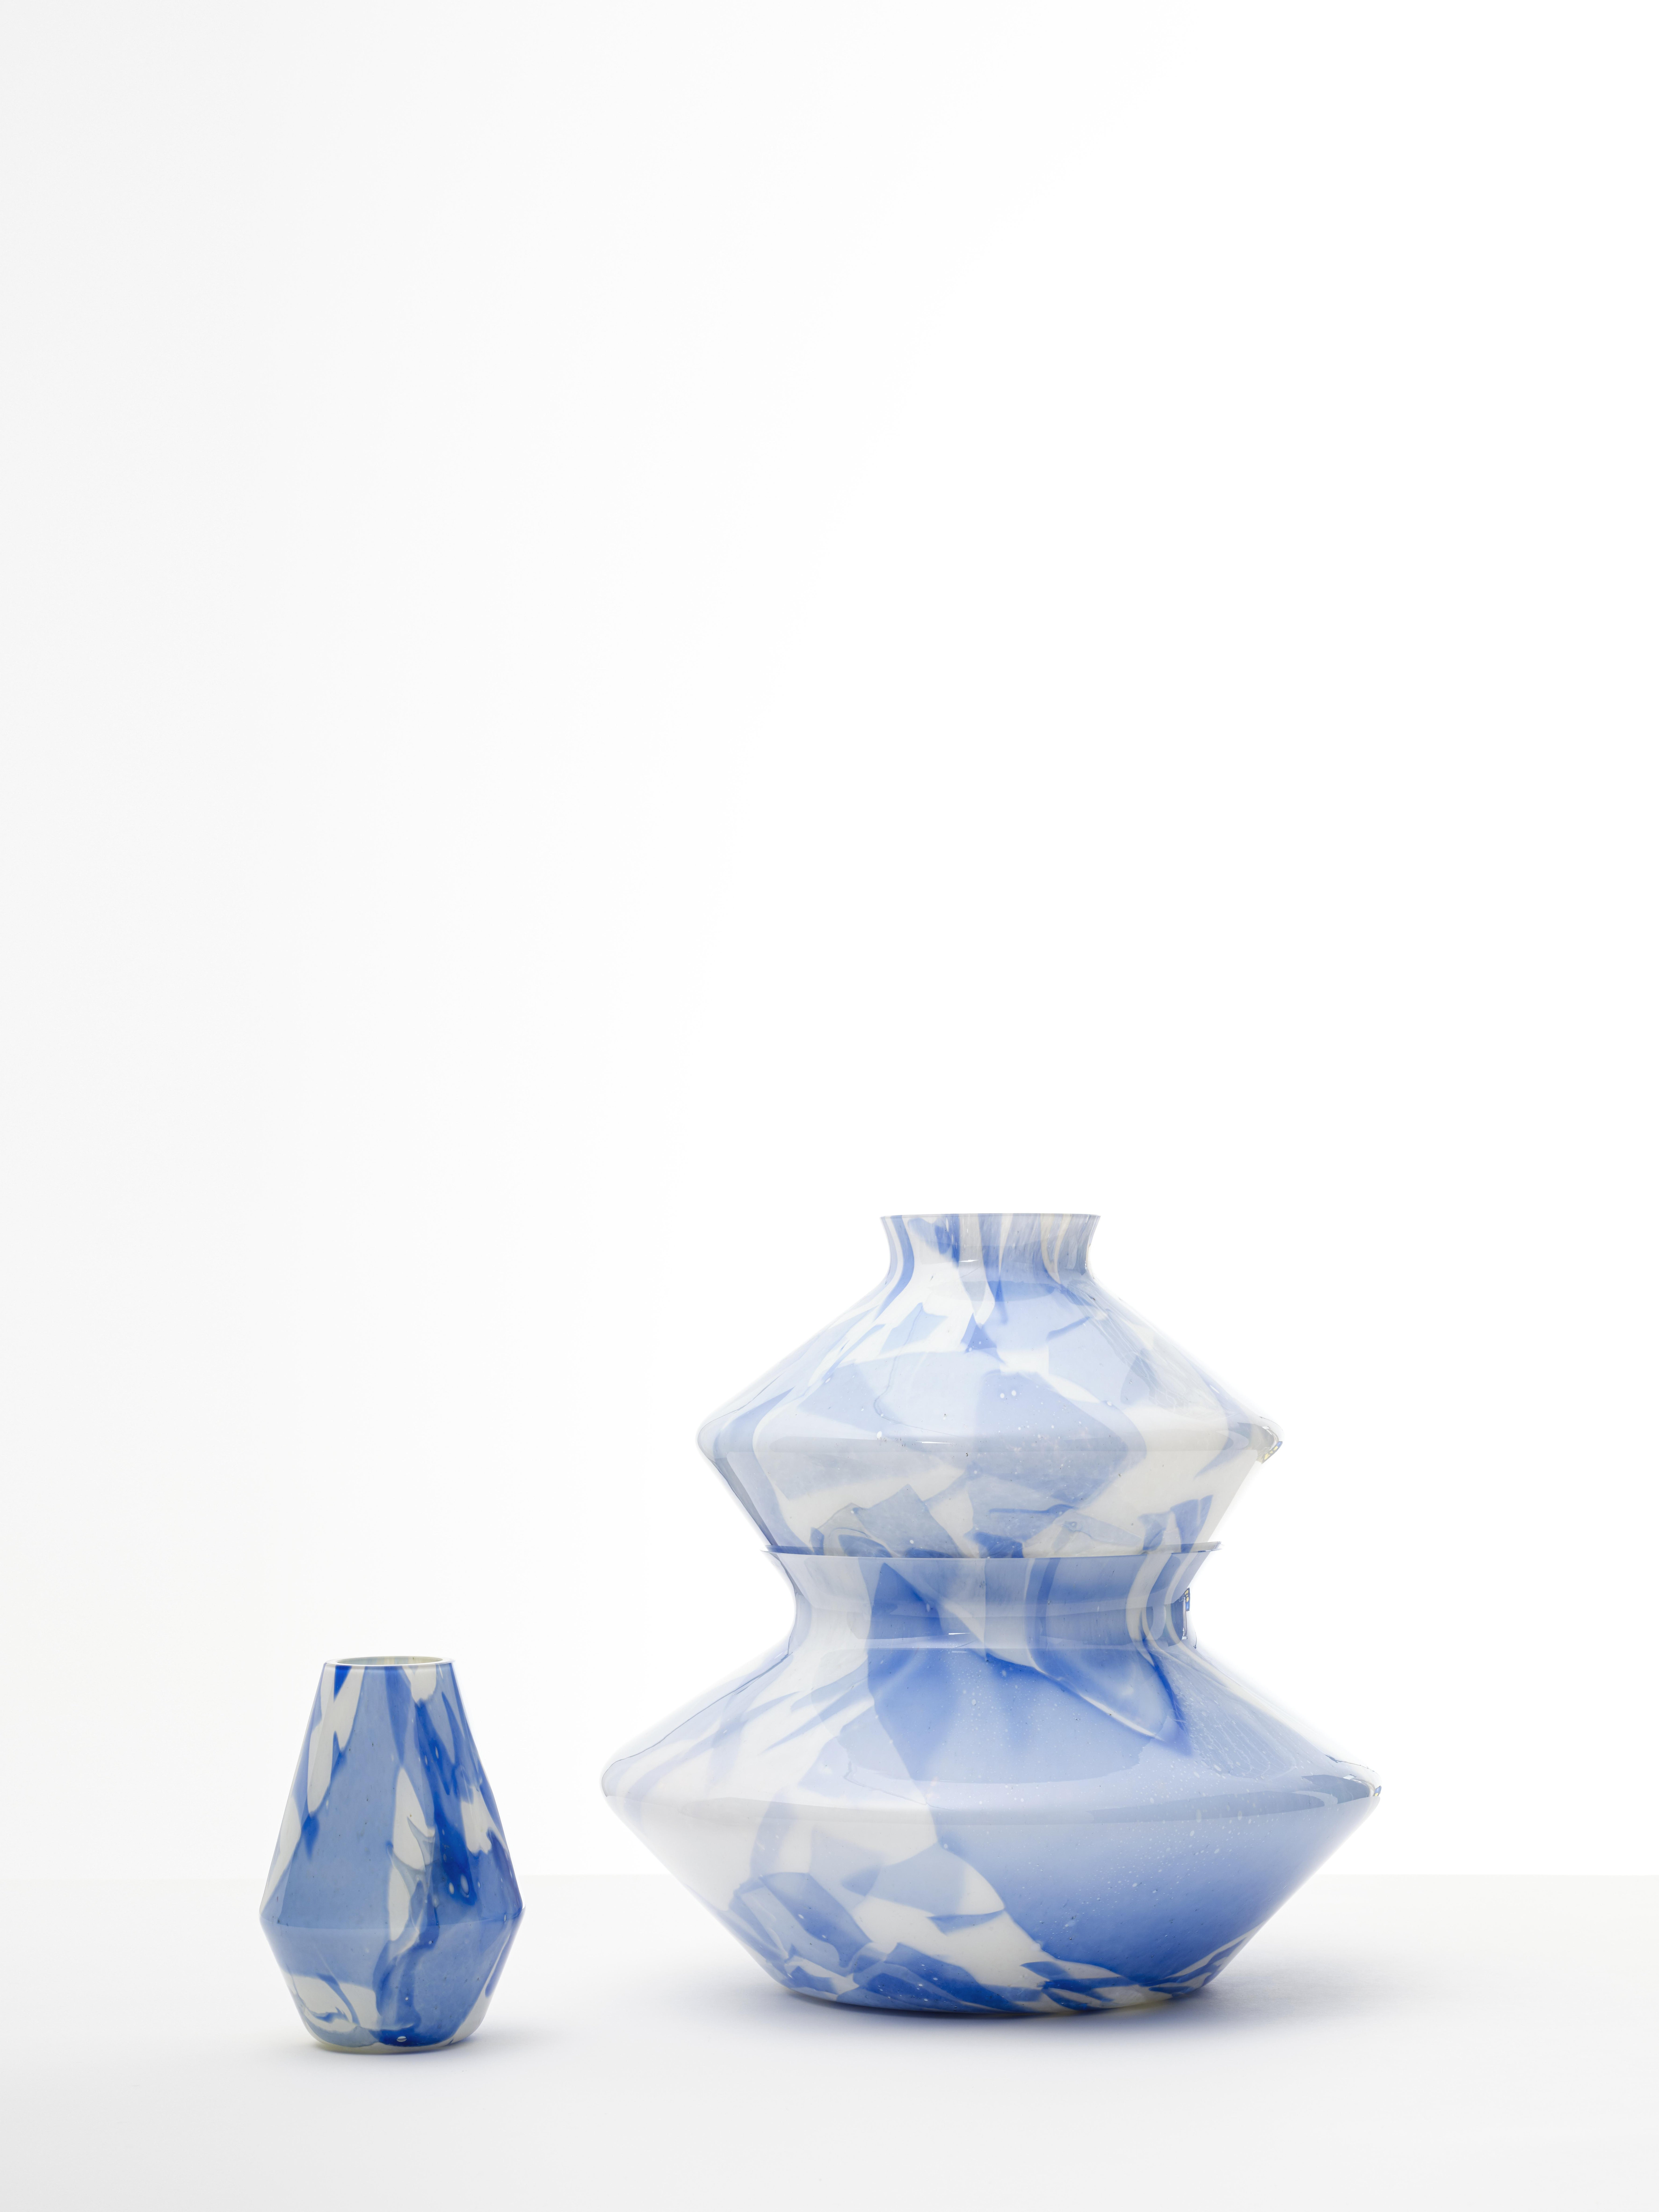 Murano Glass Lapis Variopinto Trio of Vases by Stories of Italy with Alberto and Francesco Meda
“In 2010, Borek Sipek invited myself and designers Andrea Branzi, Ron Arad, Oscar Tusquets and Nanda Vigo to design a blown glass object that would be